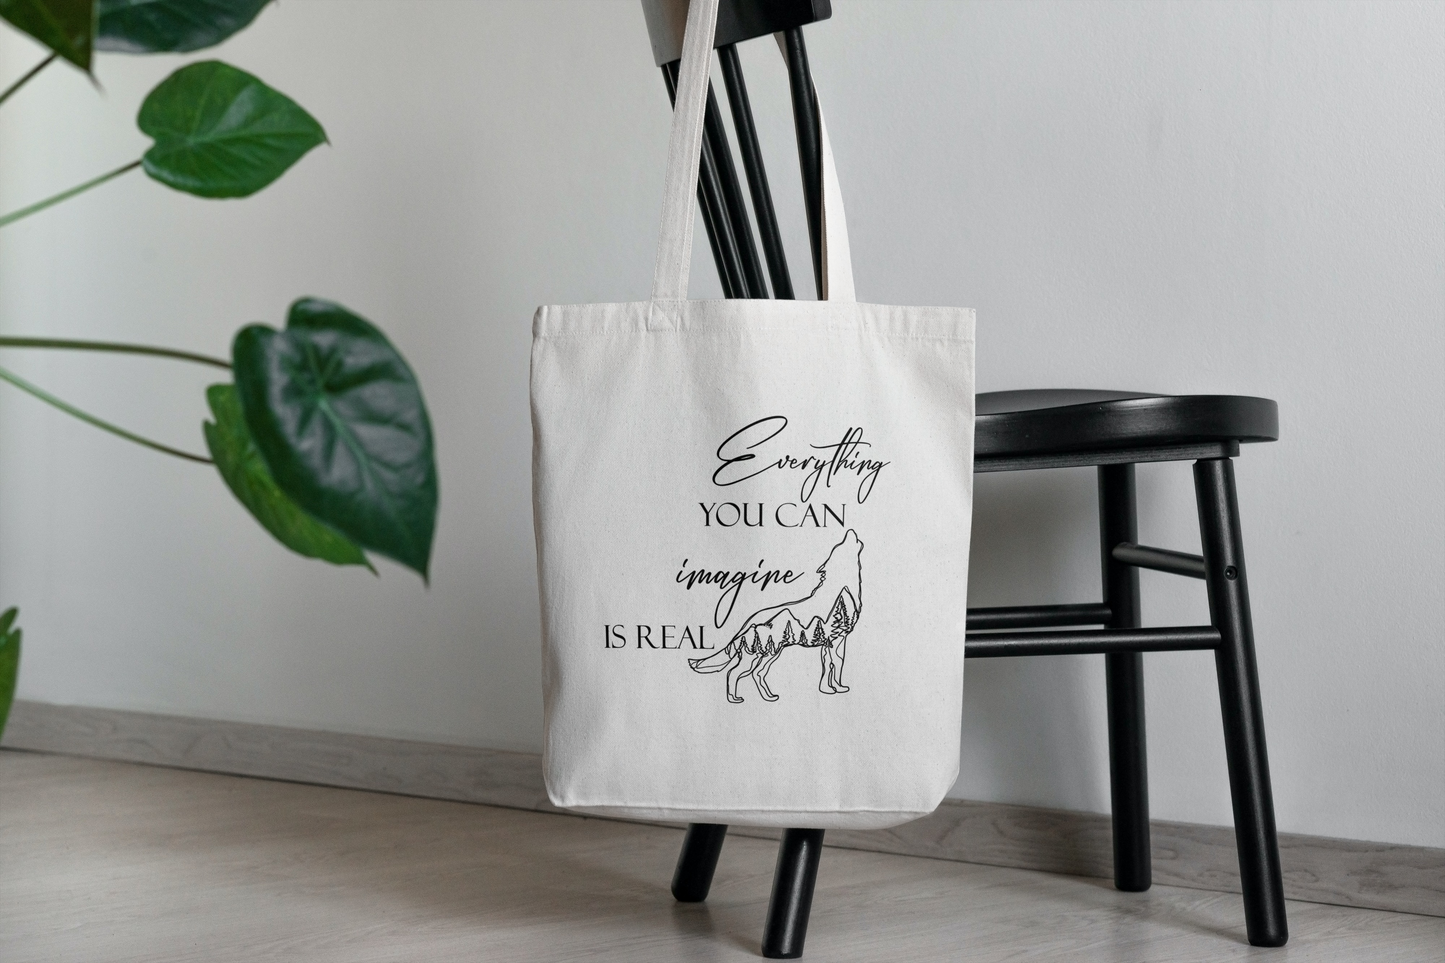 Wolf "Everything you can imagine is real" - cotton bag